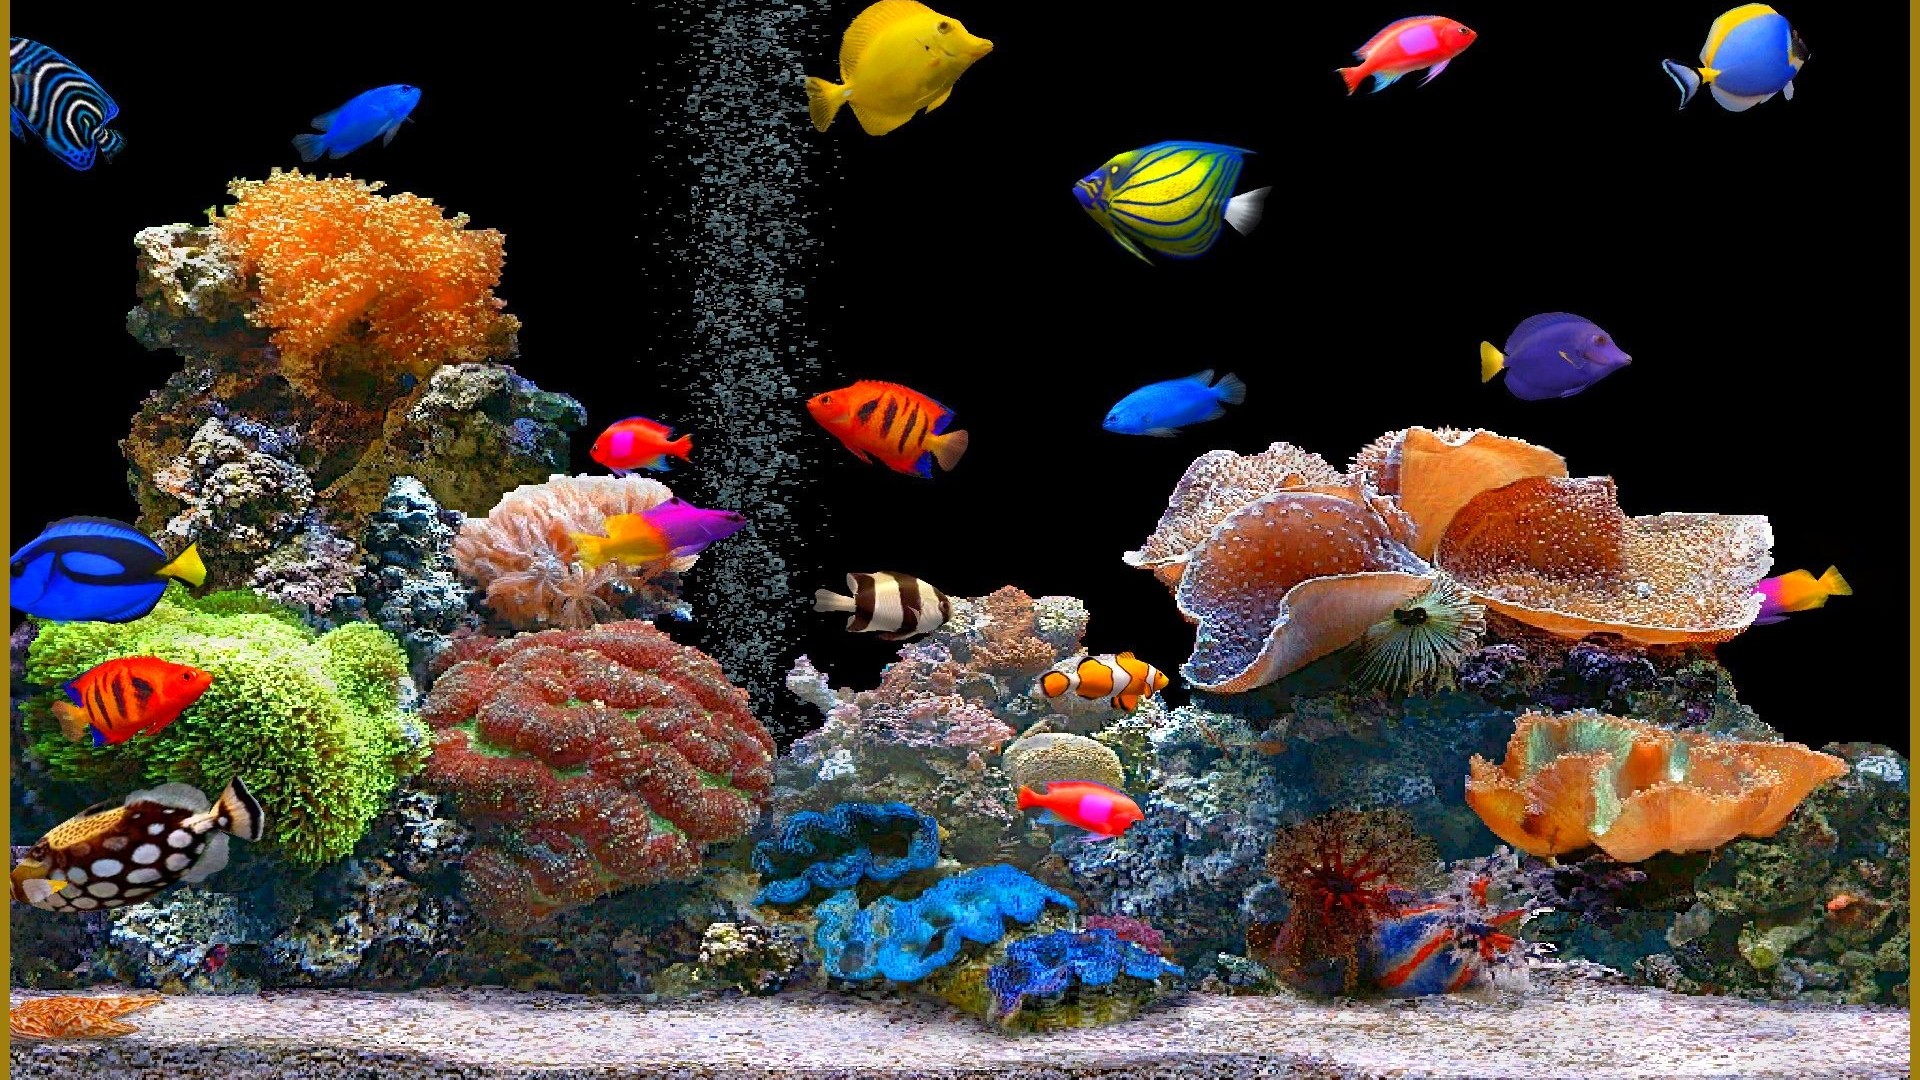 And Install Animated Fish Desktop Wallpaper There Will